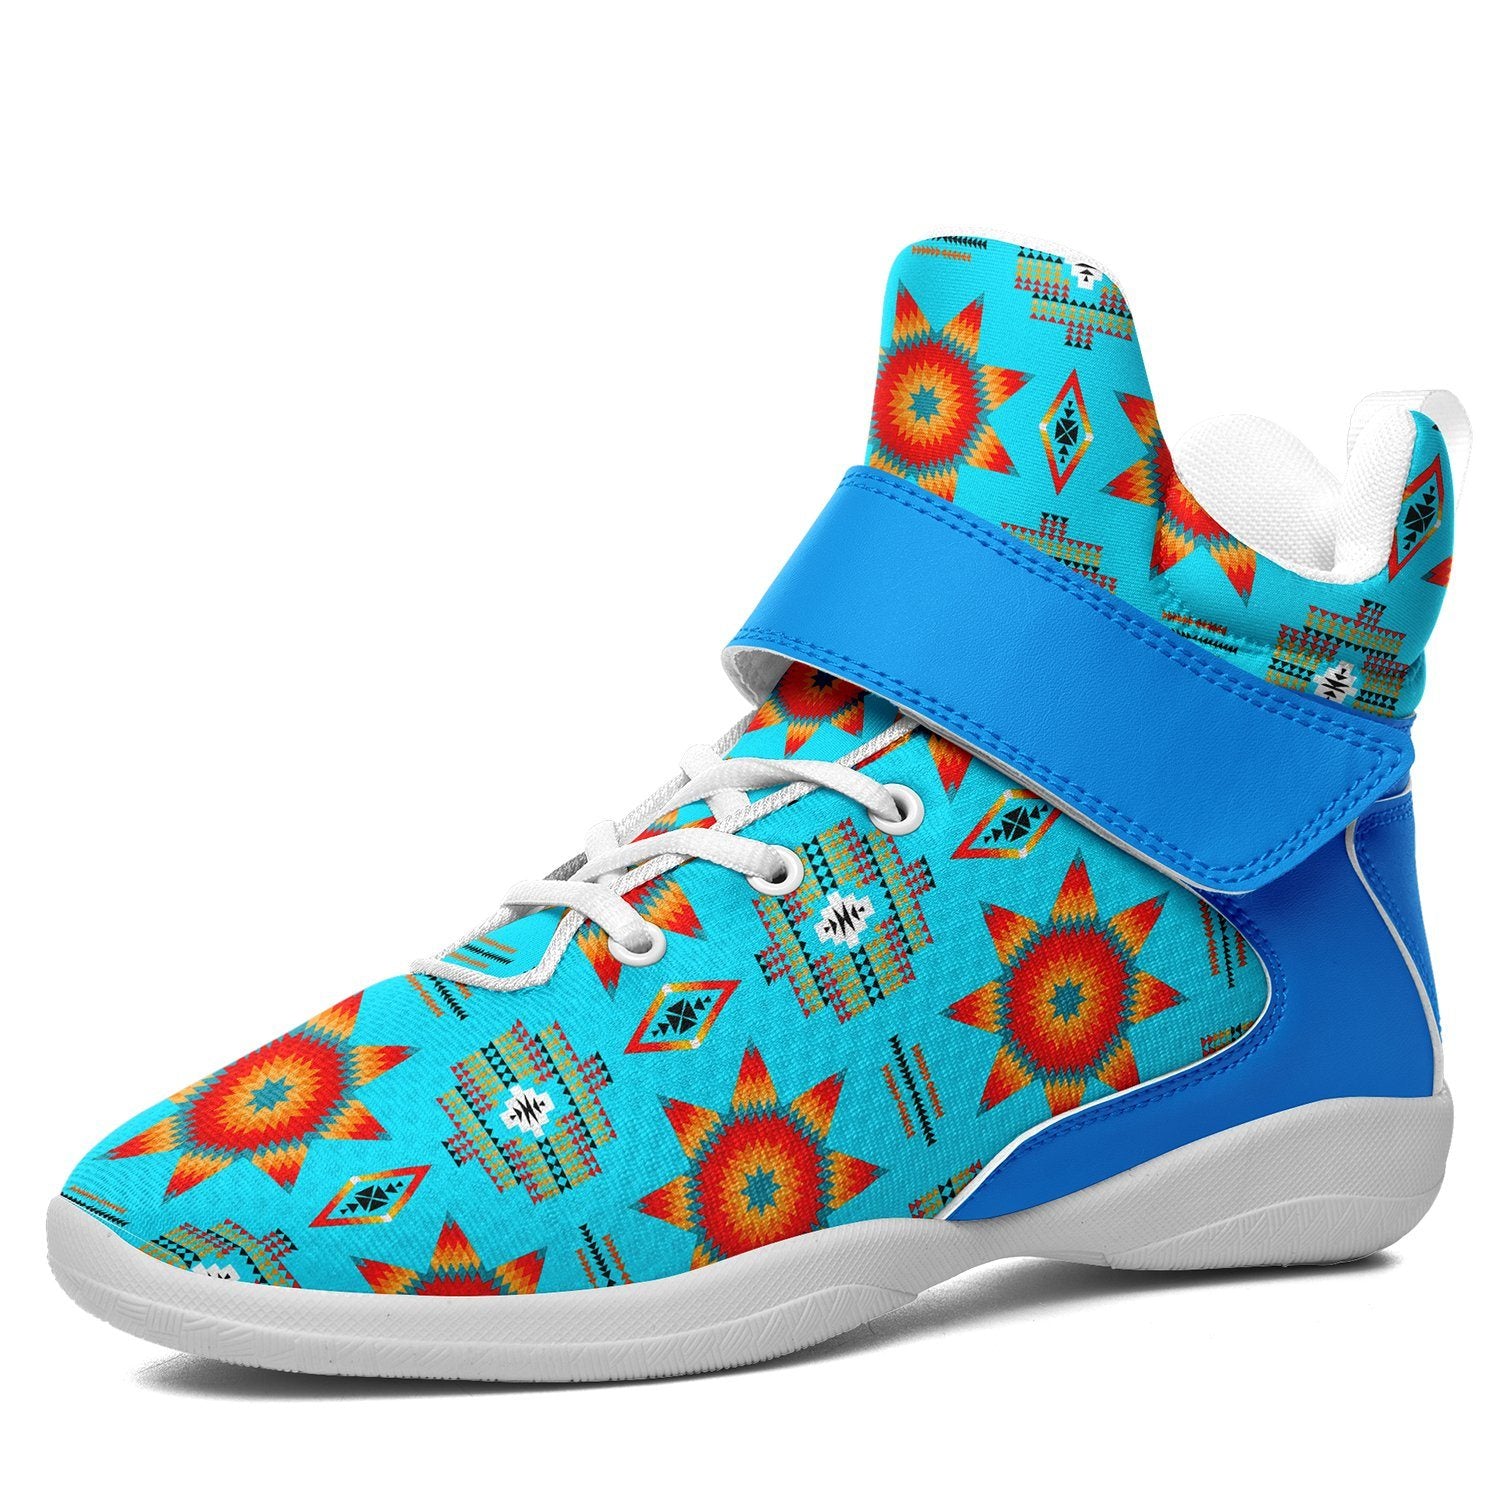 Rising Star Harvest Moon Ipottaa Basketball / Sport High Top Shoes 49 Dzine US Women 4.5 / US Youth 3.5 / EUR 35 White Sole with Light Blue Strap 